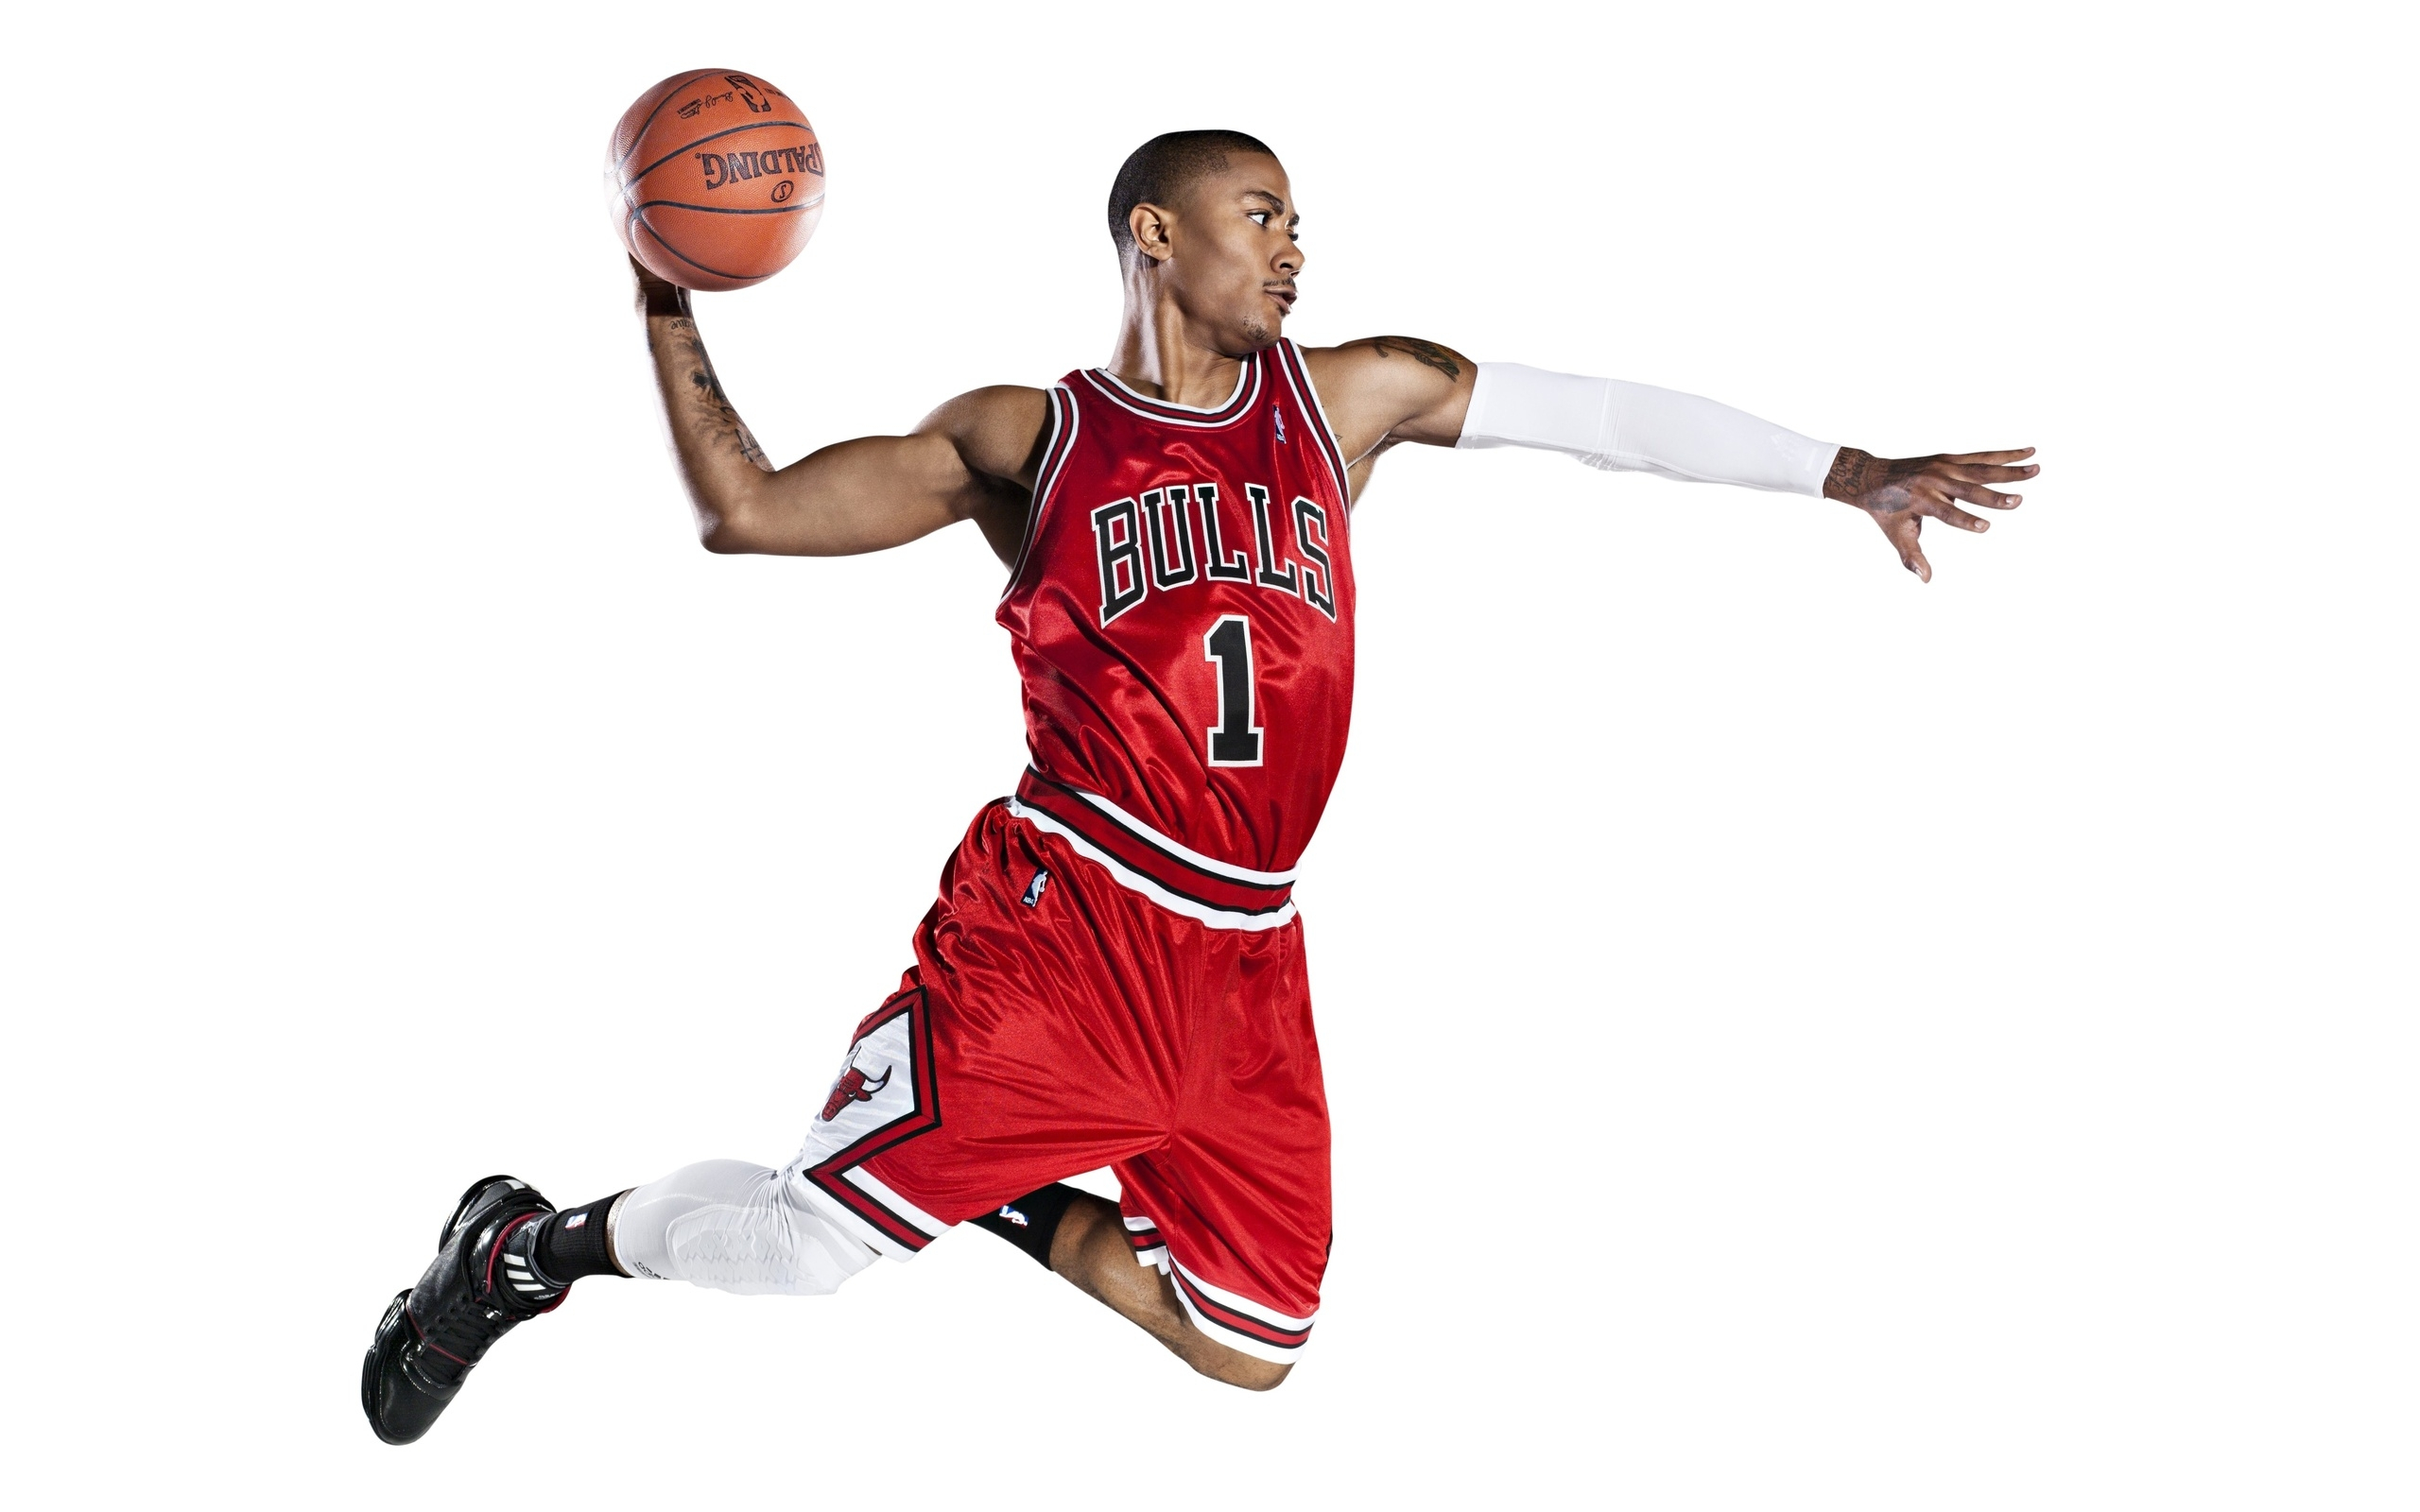 A basketball player in a red jersey jumping in the air with a basketball in one hand. - NBA